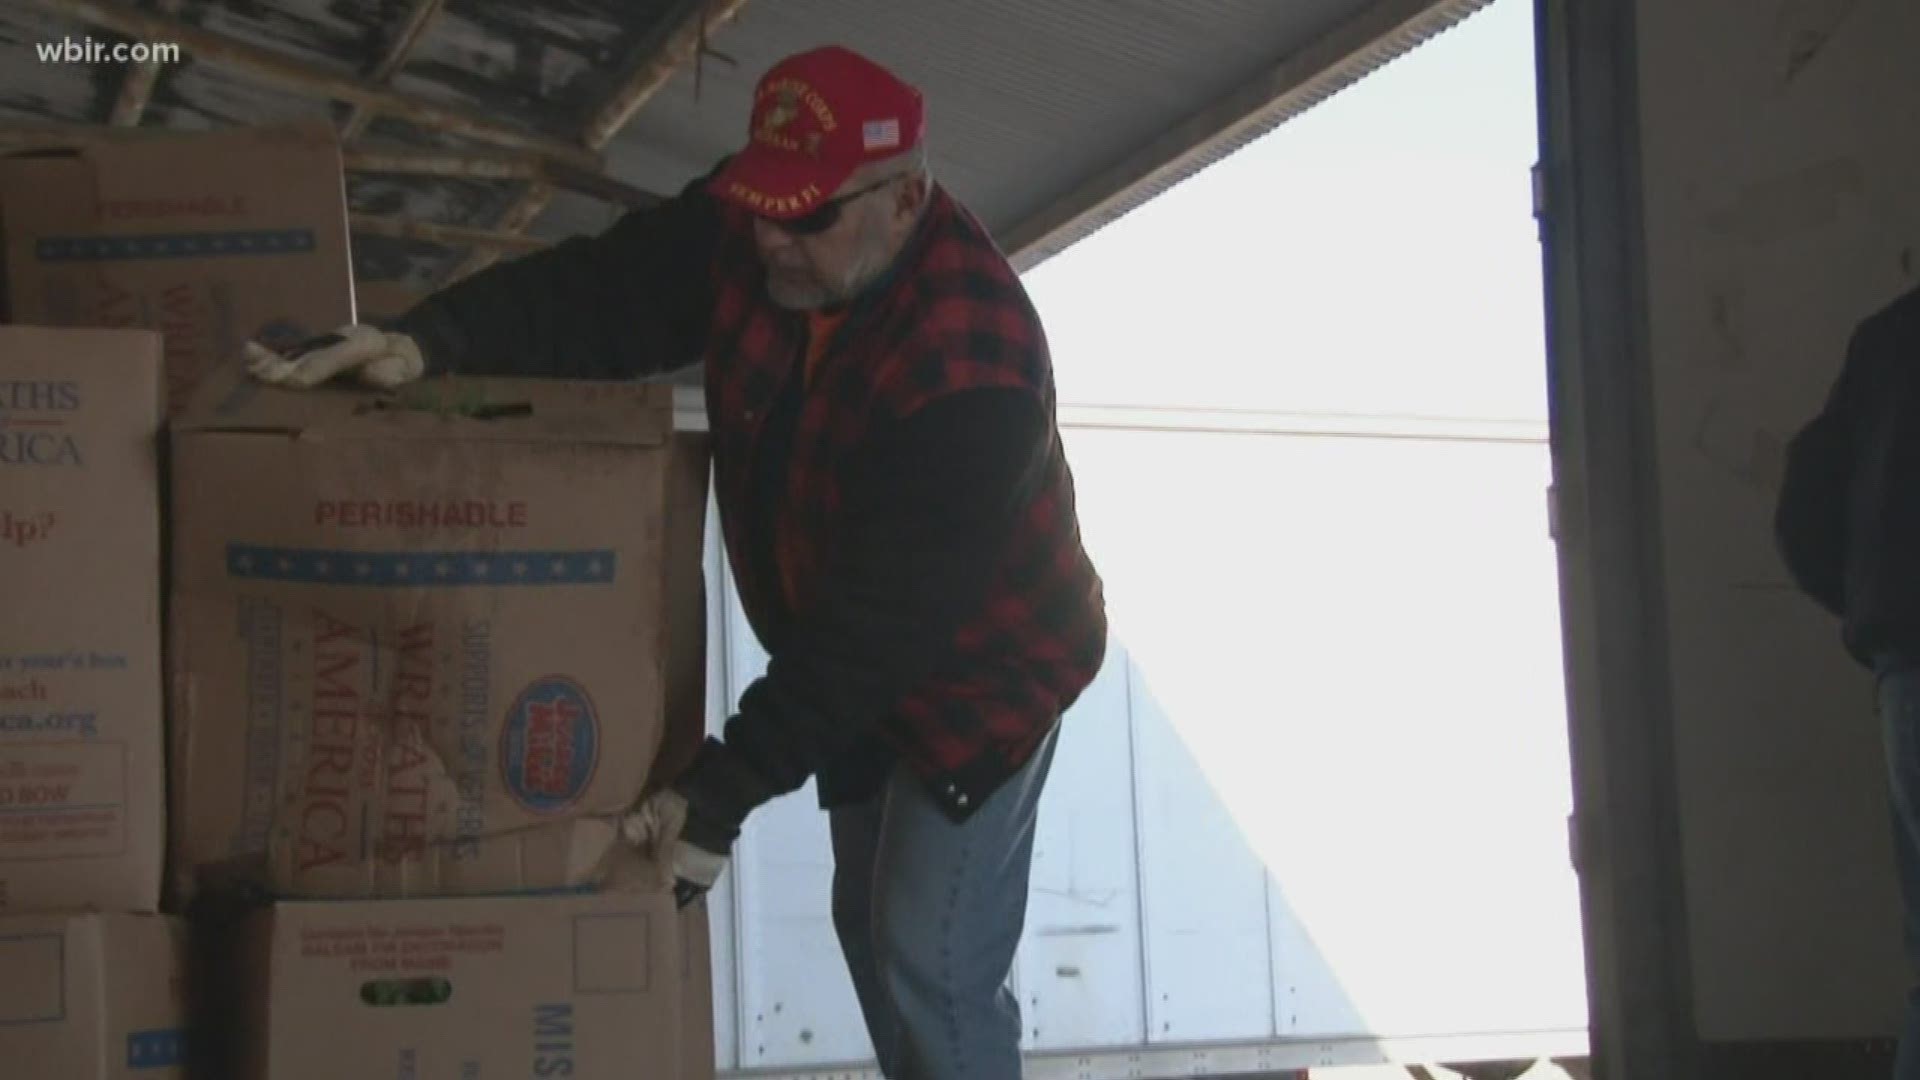 Thousands of wreaths arrived in East Tennessee Thursday to be placed on the graves of veterans this holiday season.